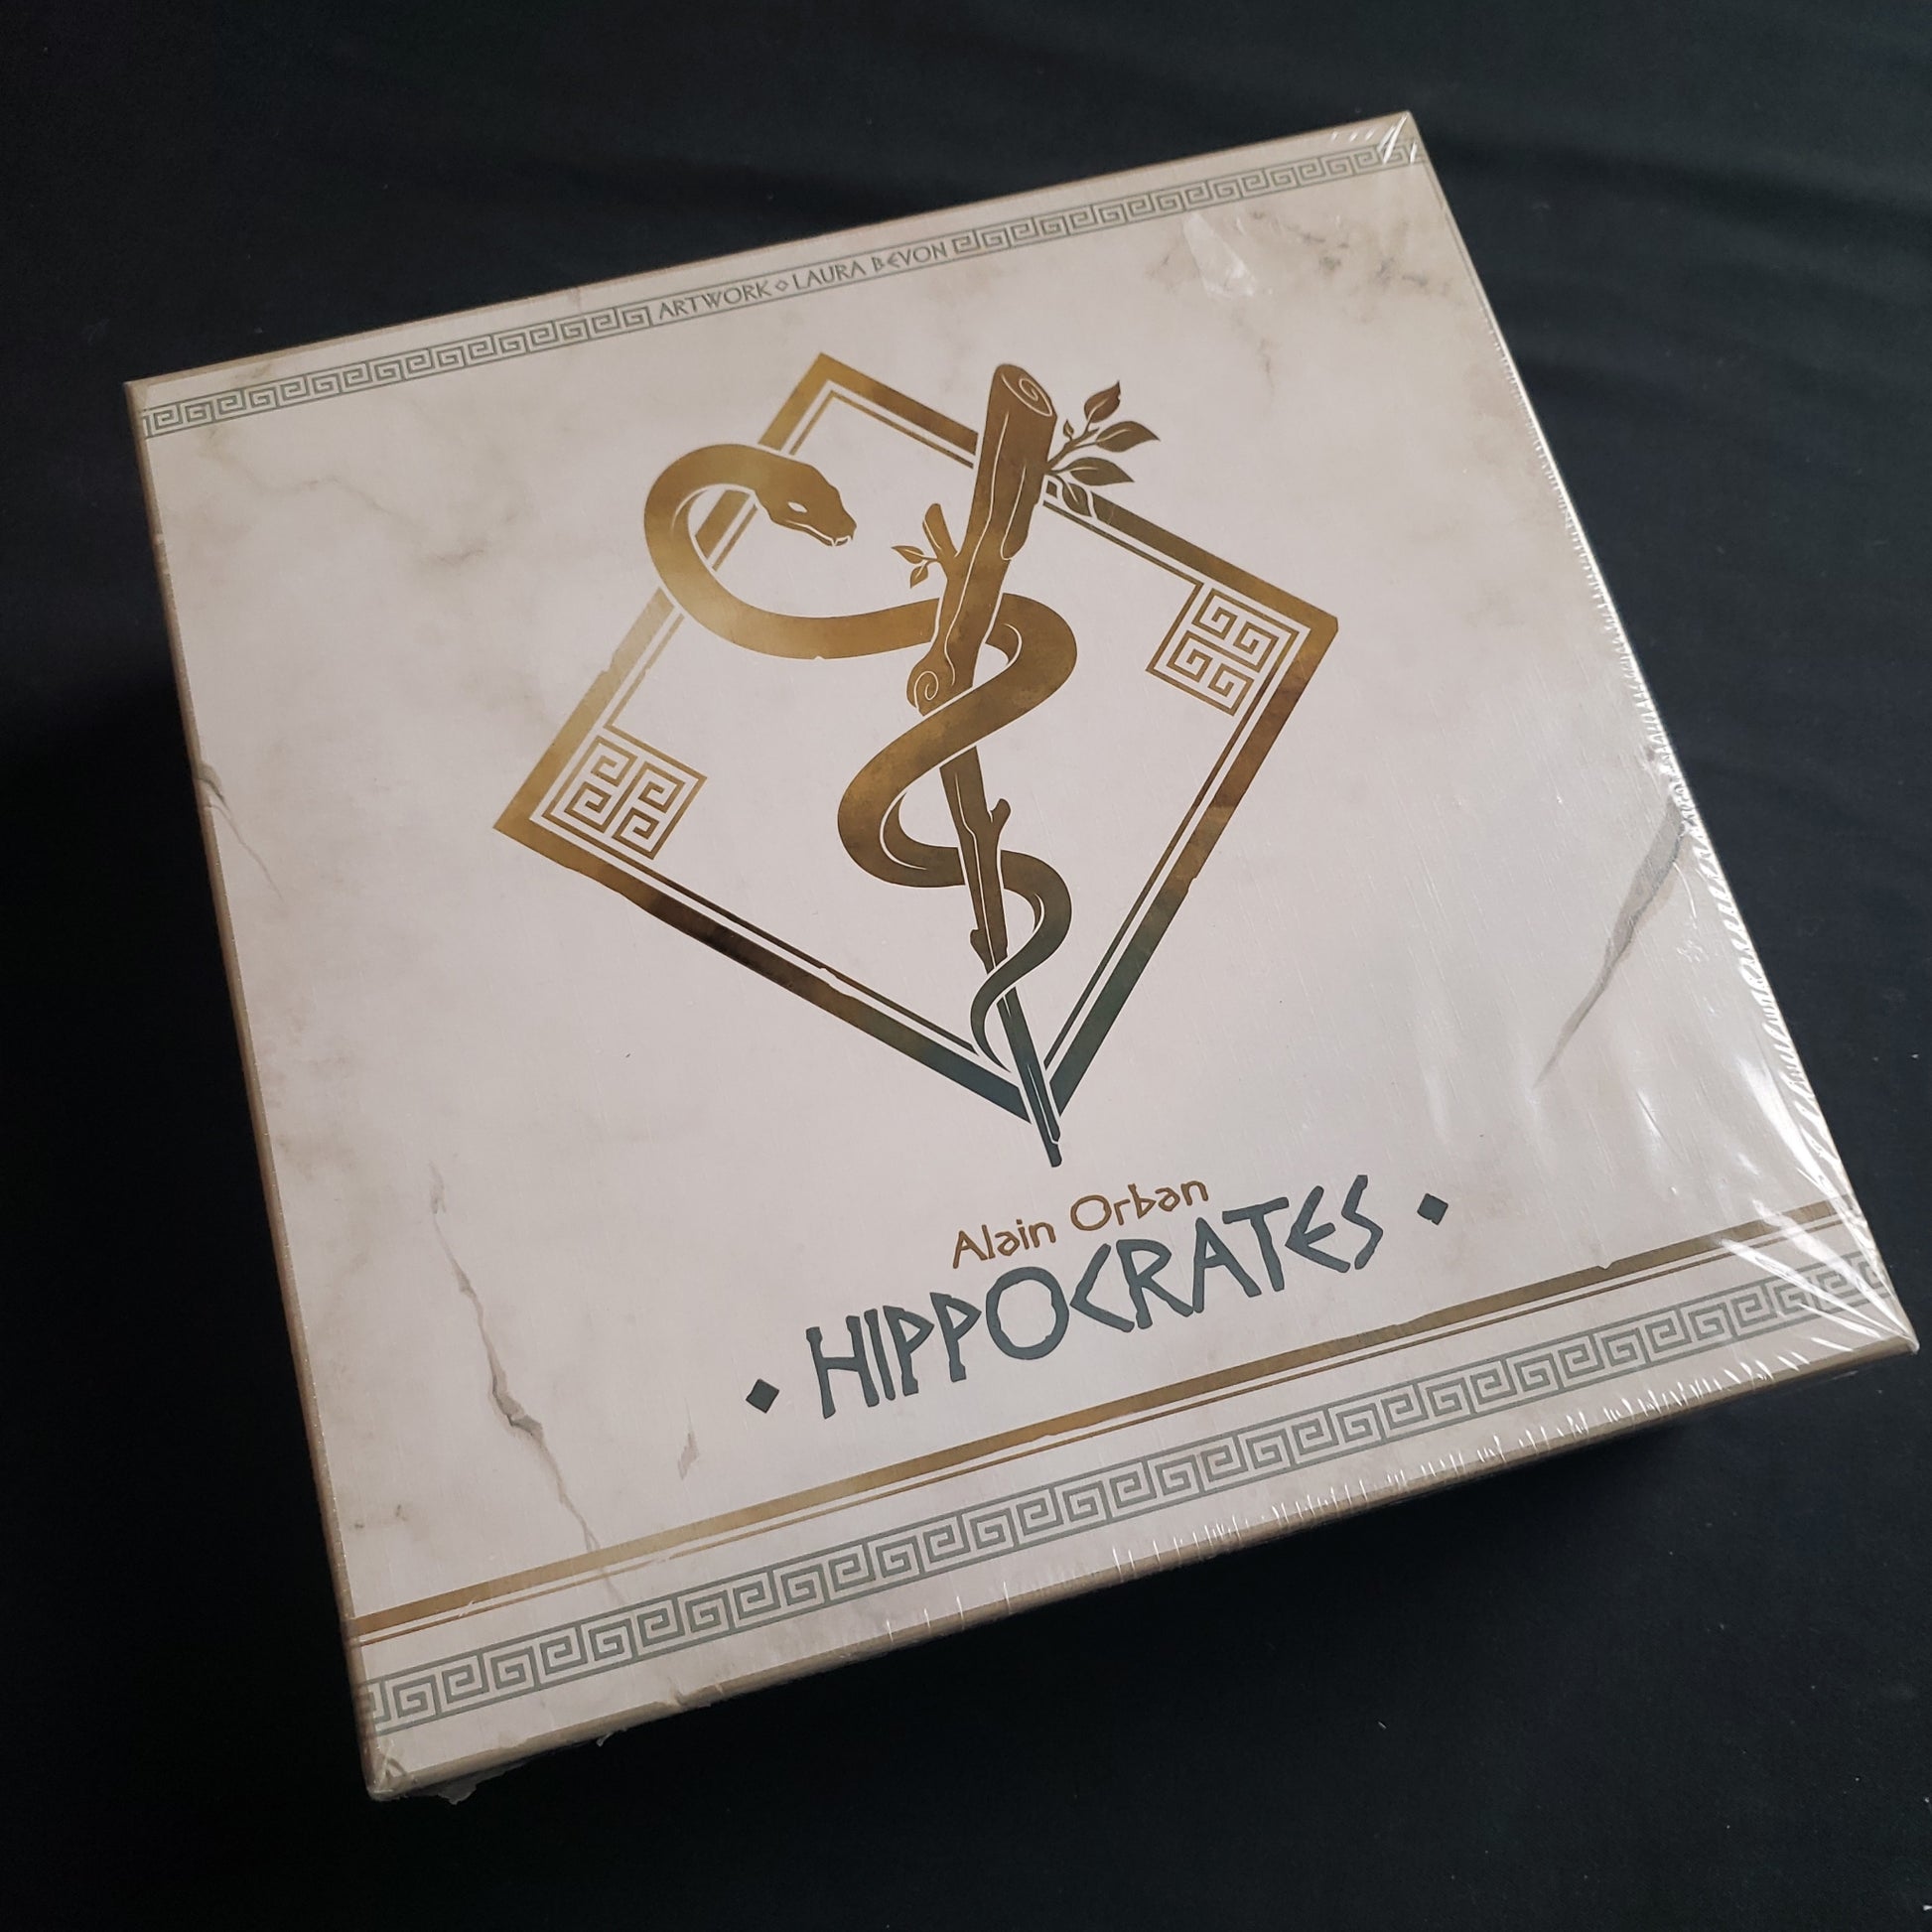 Image shows the front cover of the box of the Hippocrates board game